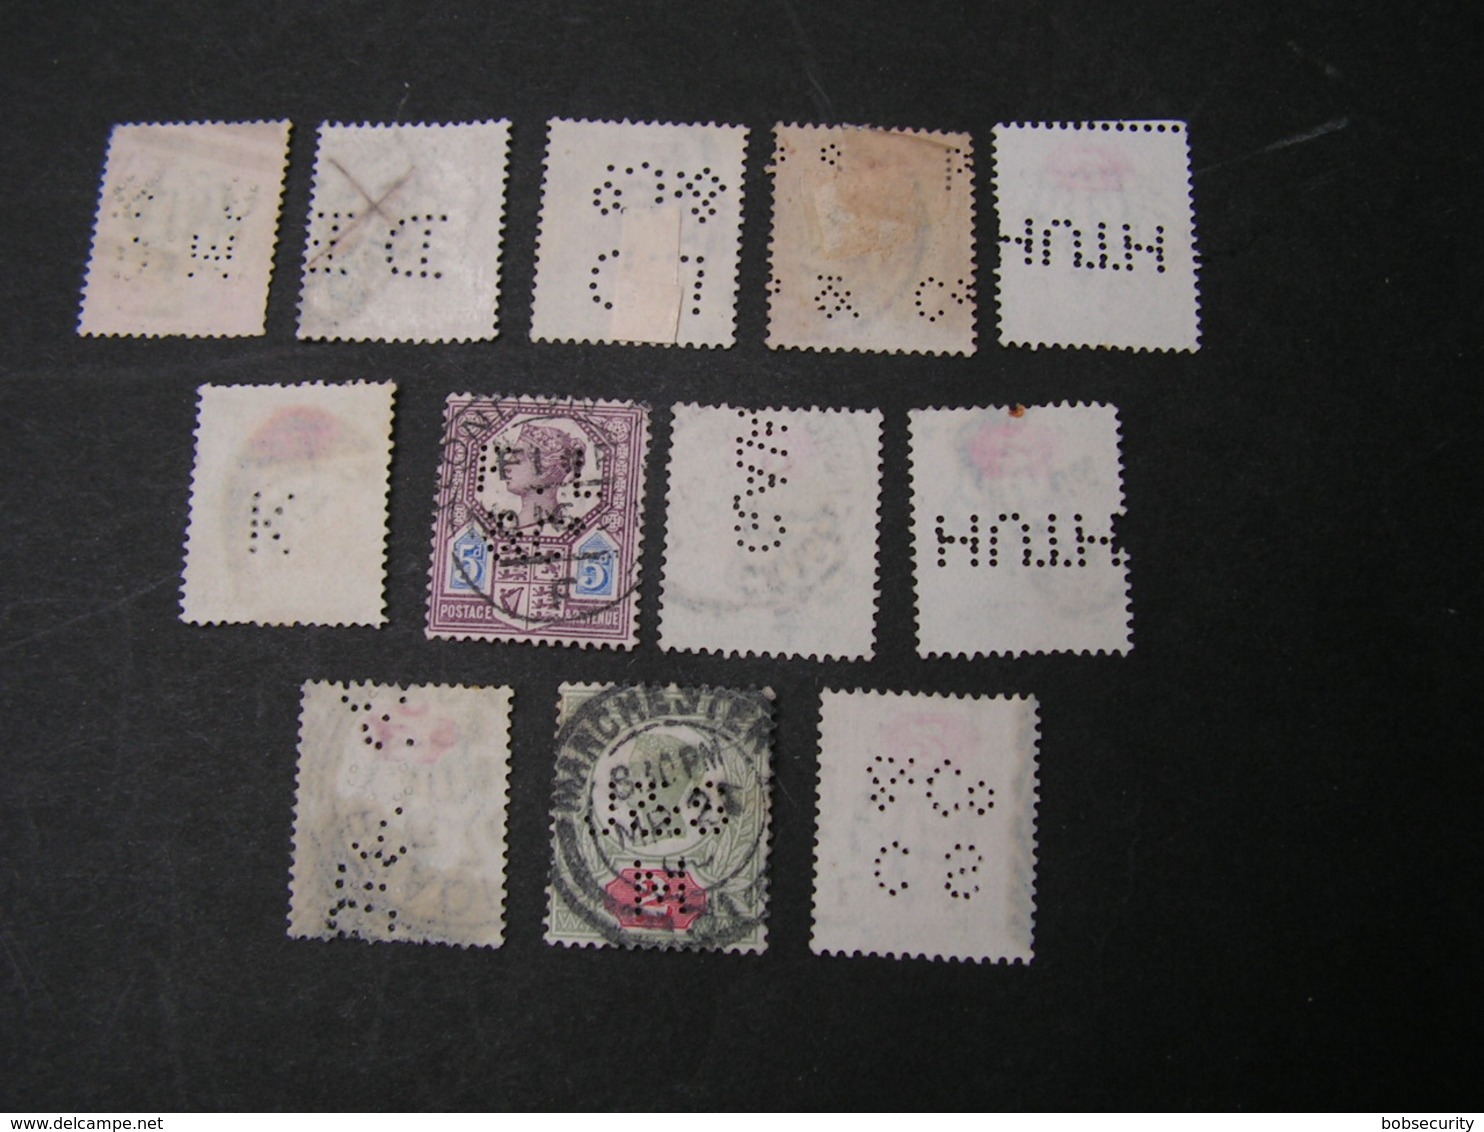 GB Perfin Lot Very Old - Lots & Kiloware (mixtures) - Max. 999 Stamps